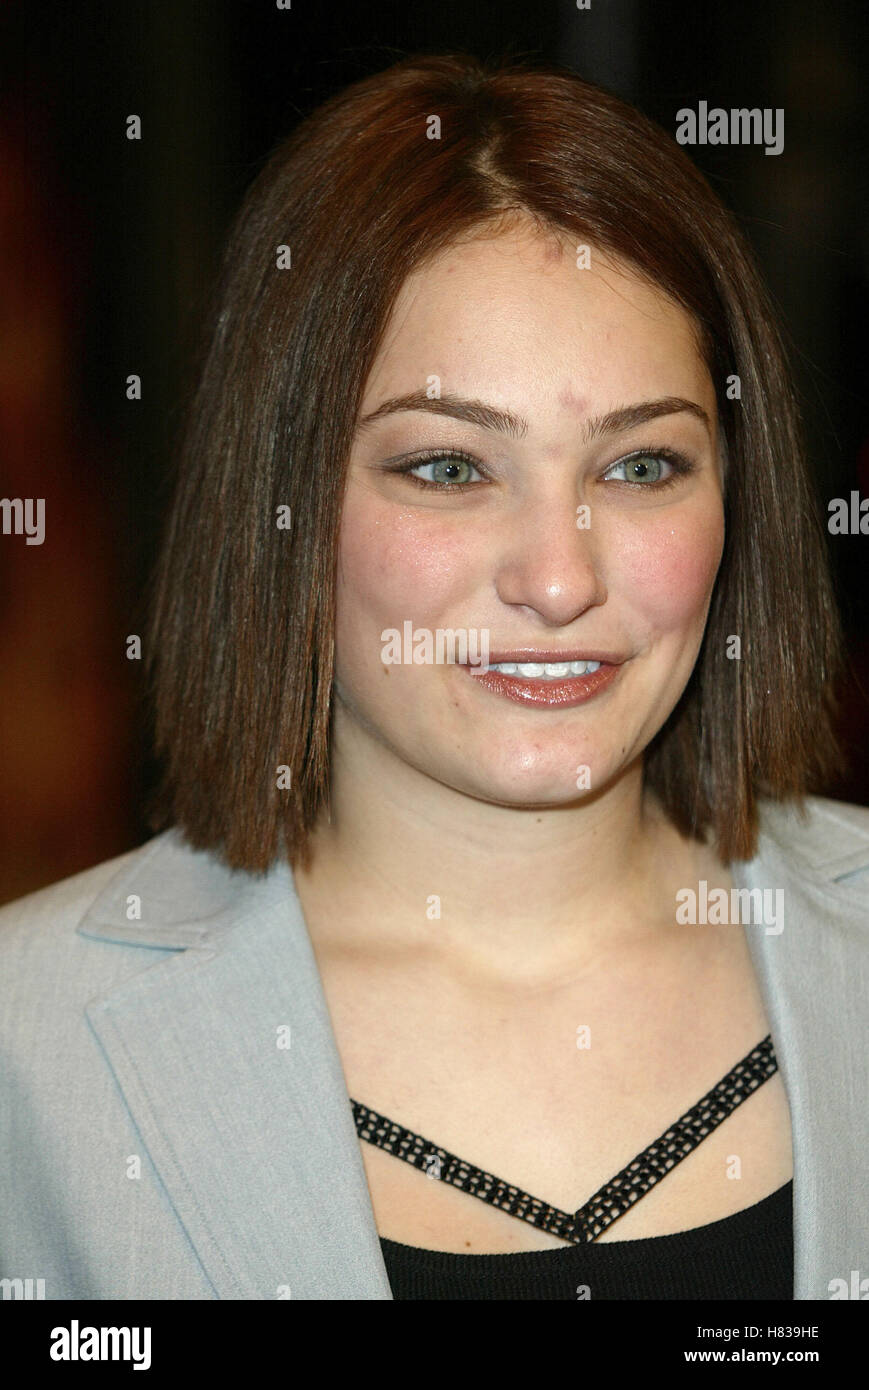 RACHEL ROTH THE TIME MACHINE FILM PREMIERE WESTWOOD LOS ANGELES USA 04 March 2002 Stock Photo